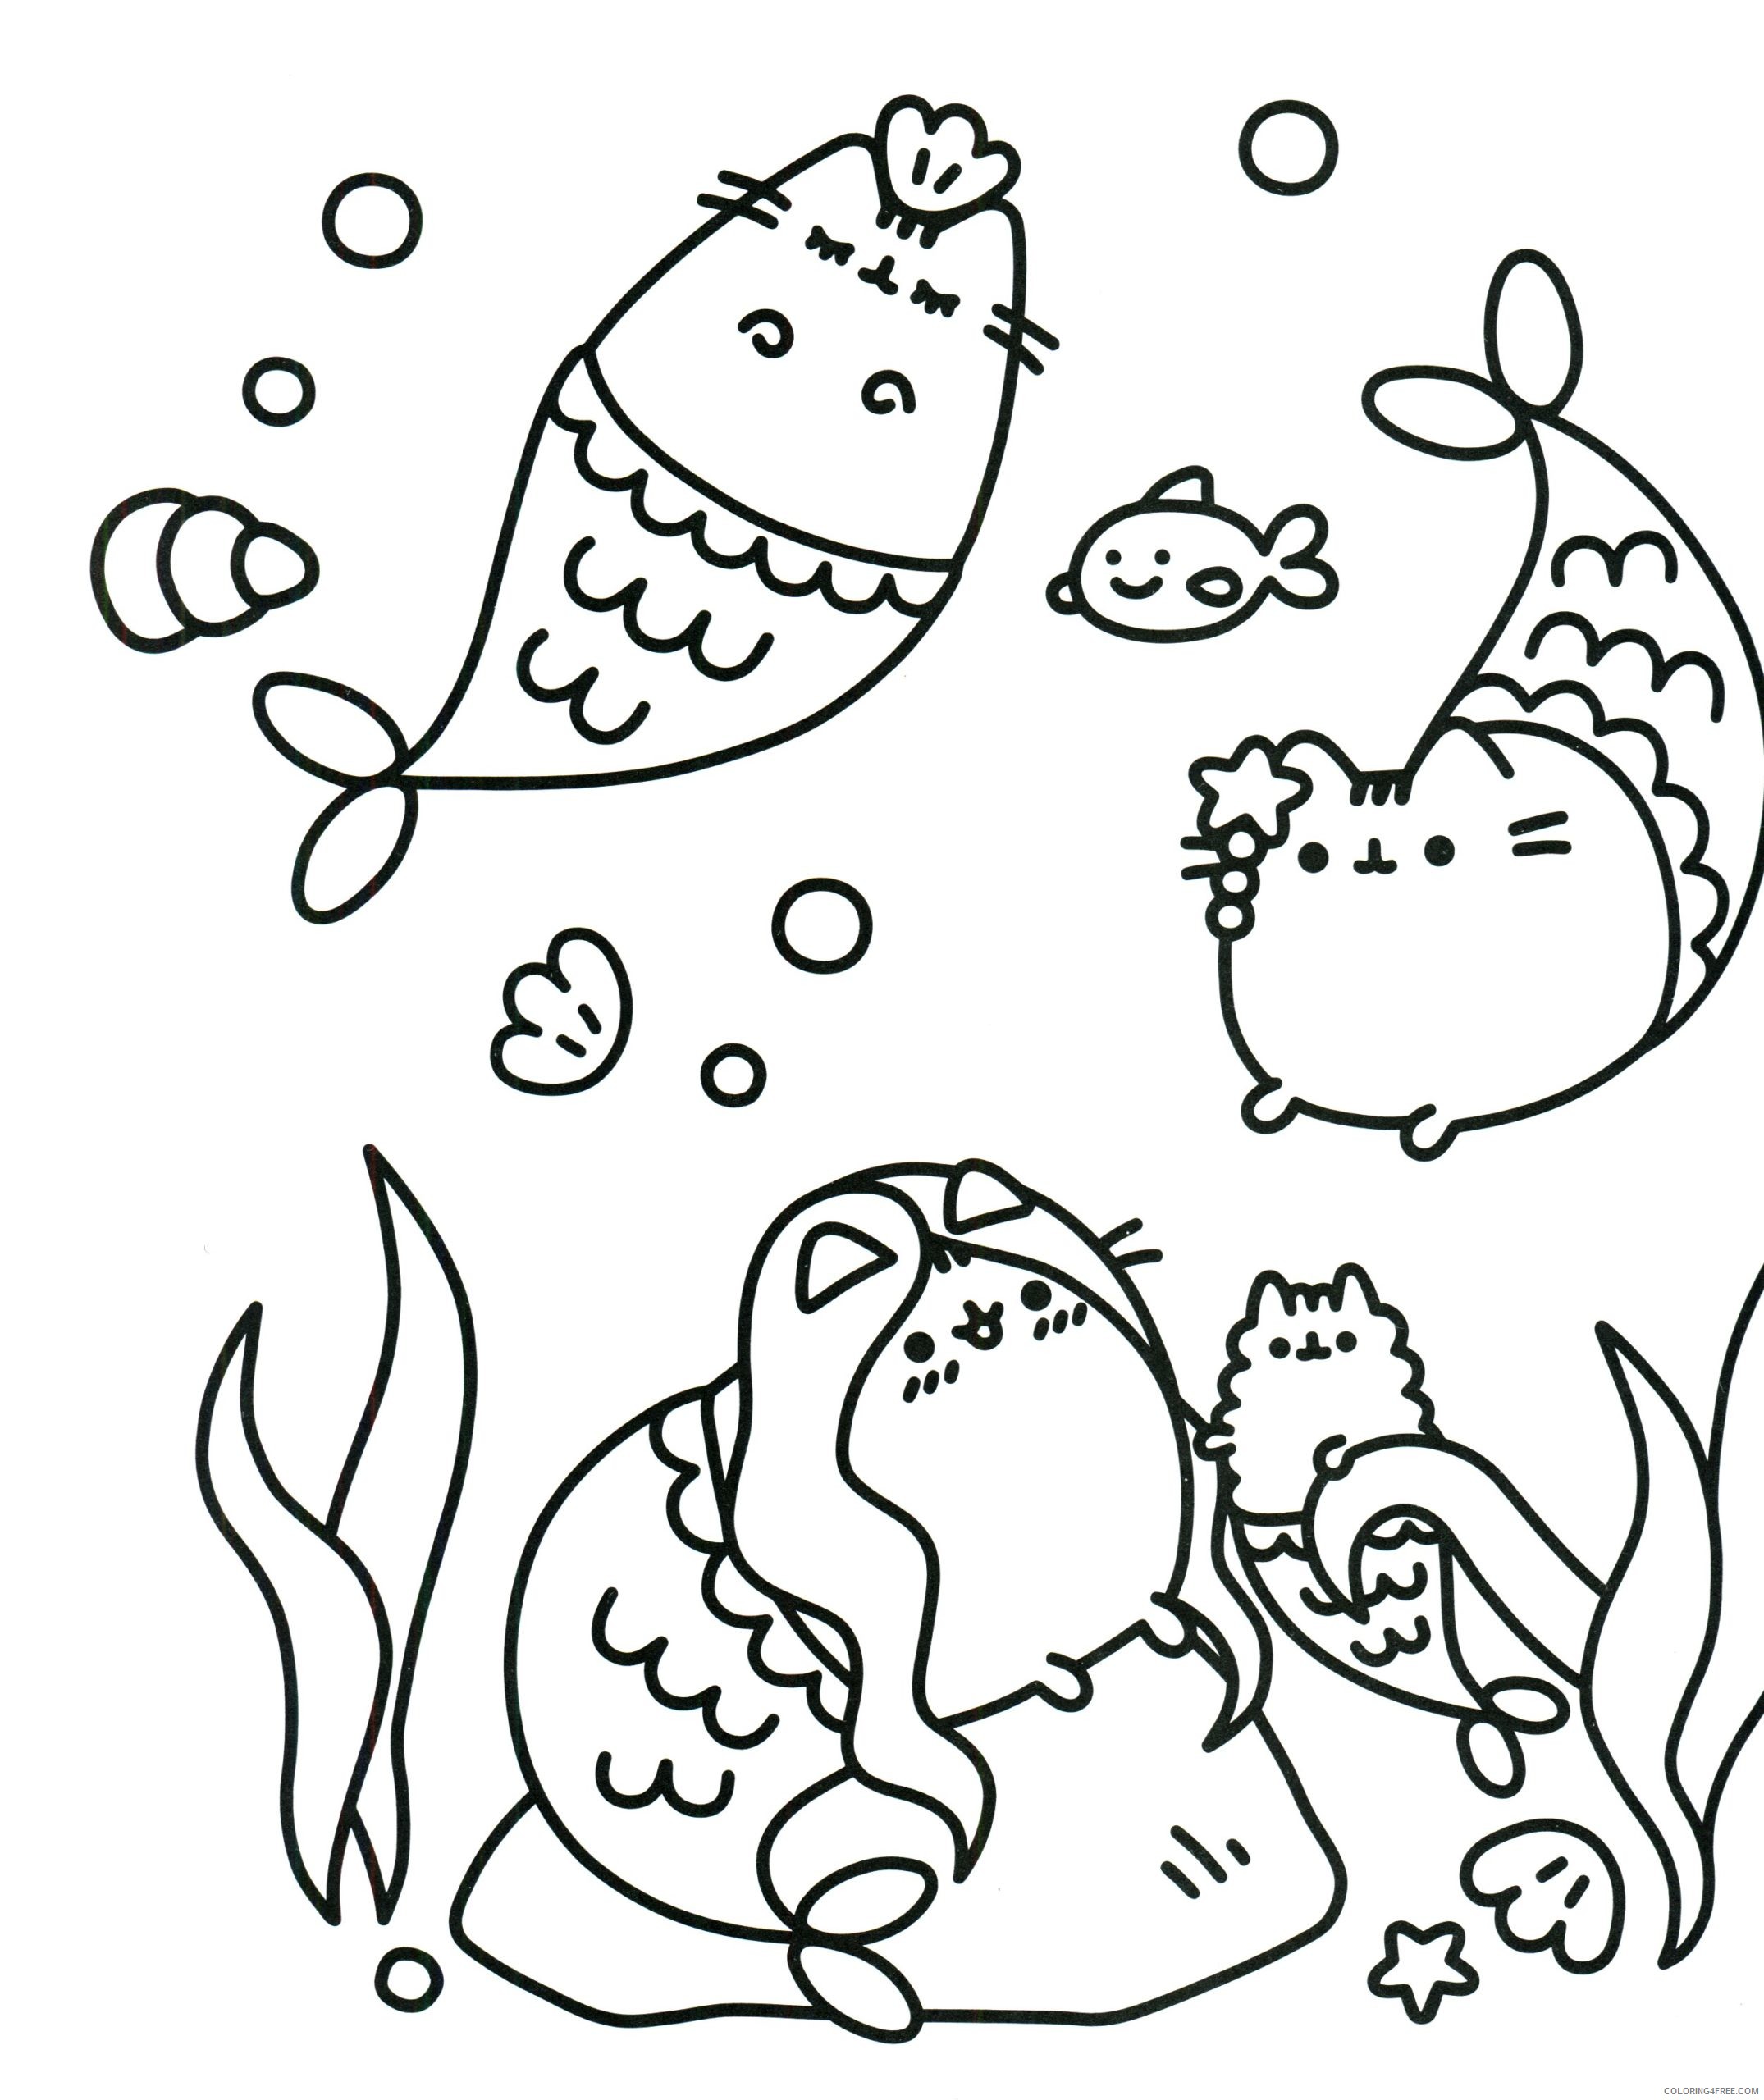 Pusheen Coloring Pages Cartoons 1541488746_hurry pusheen new best friends Printable 2020 5164 Coloring4free